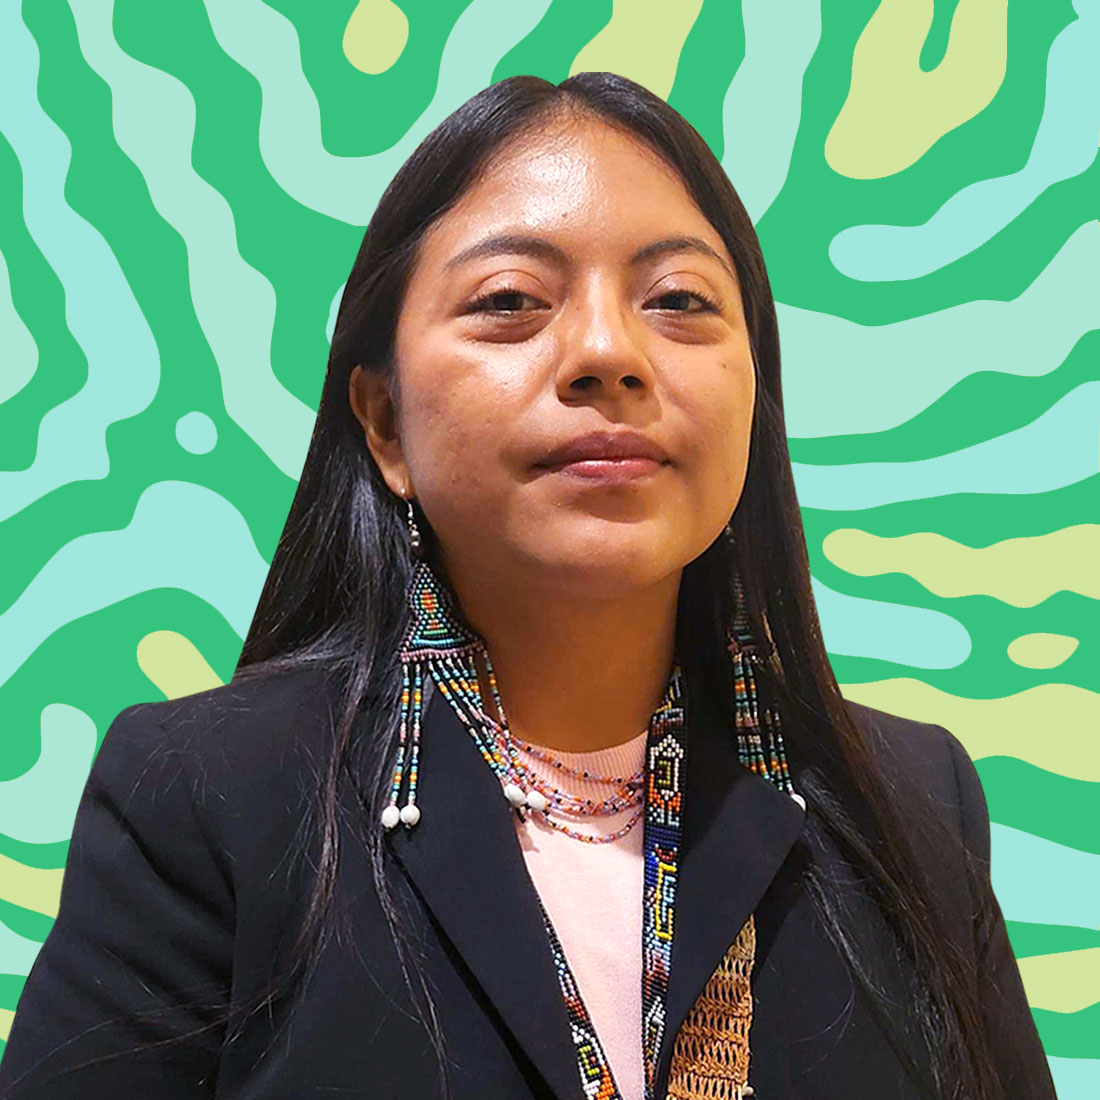 A headshot of a young person in a black jacket and wearing beaded earrings on a green and yellow striped background